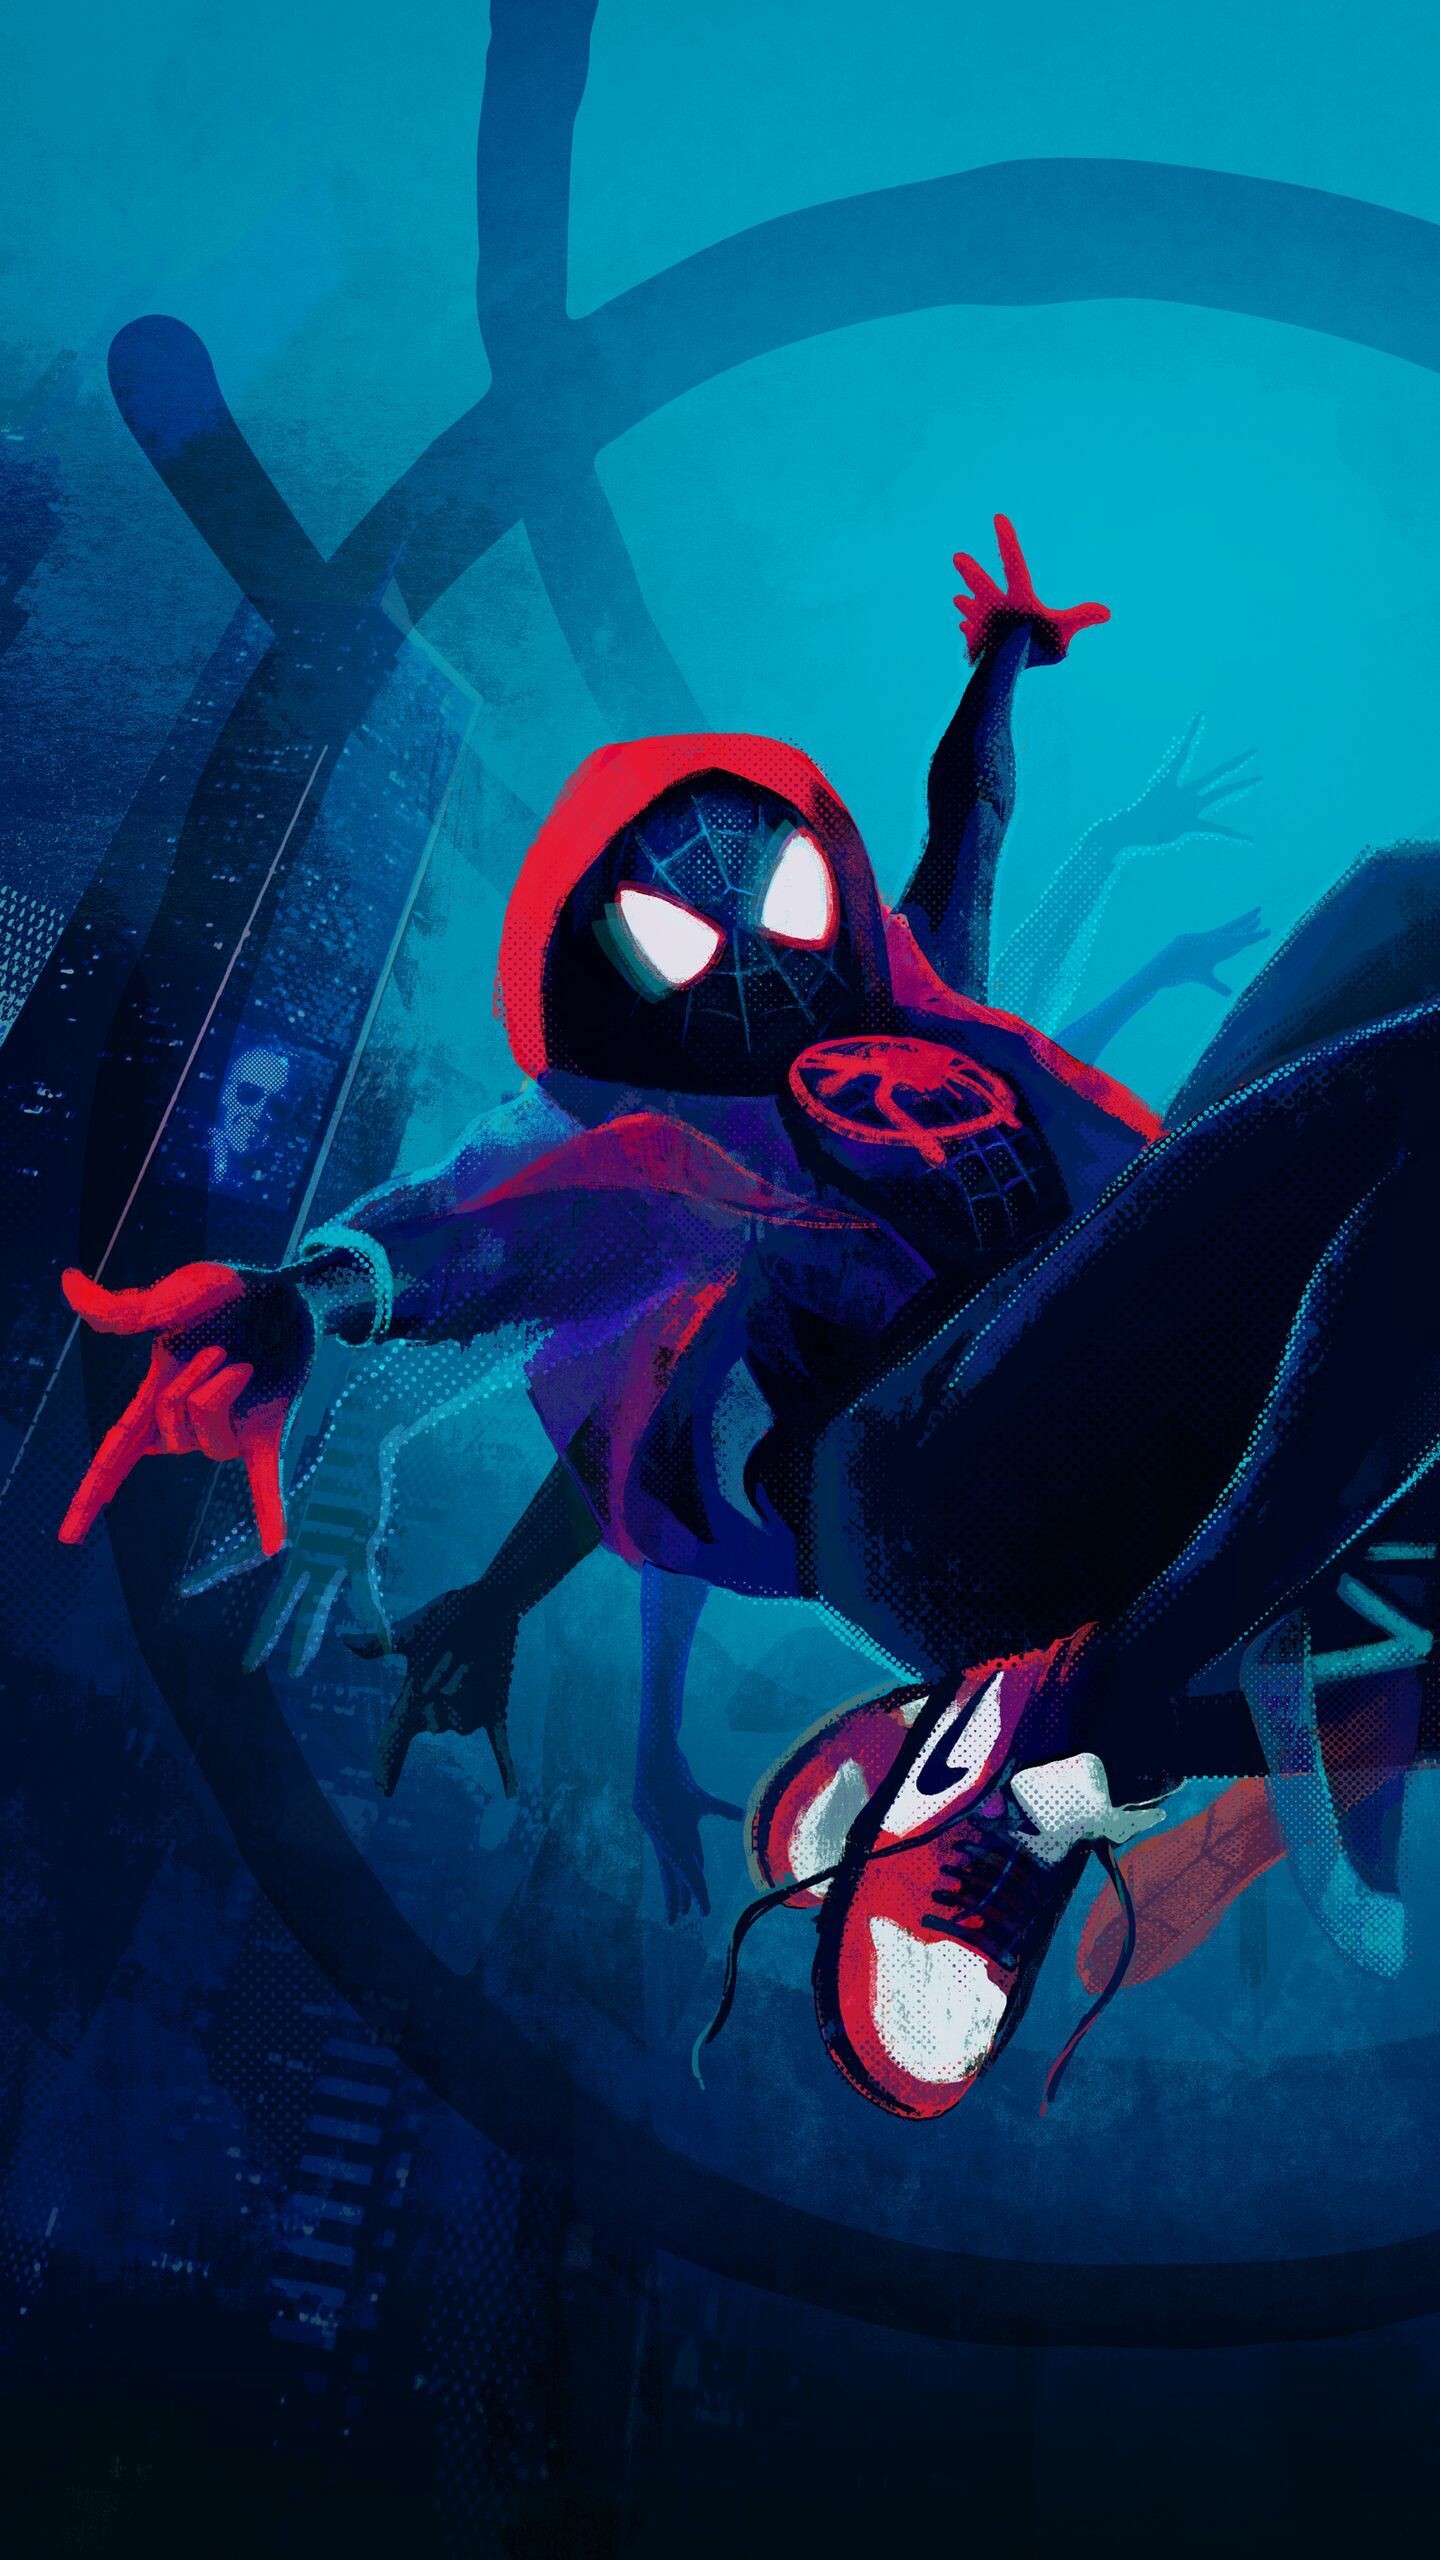 Spider-Man: Into the Spider-Verse: Miles Morales, able to produce electricity through his hands to shock his enemies. 1440x2560 HD Wallpaper.